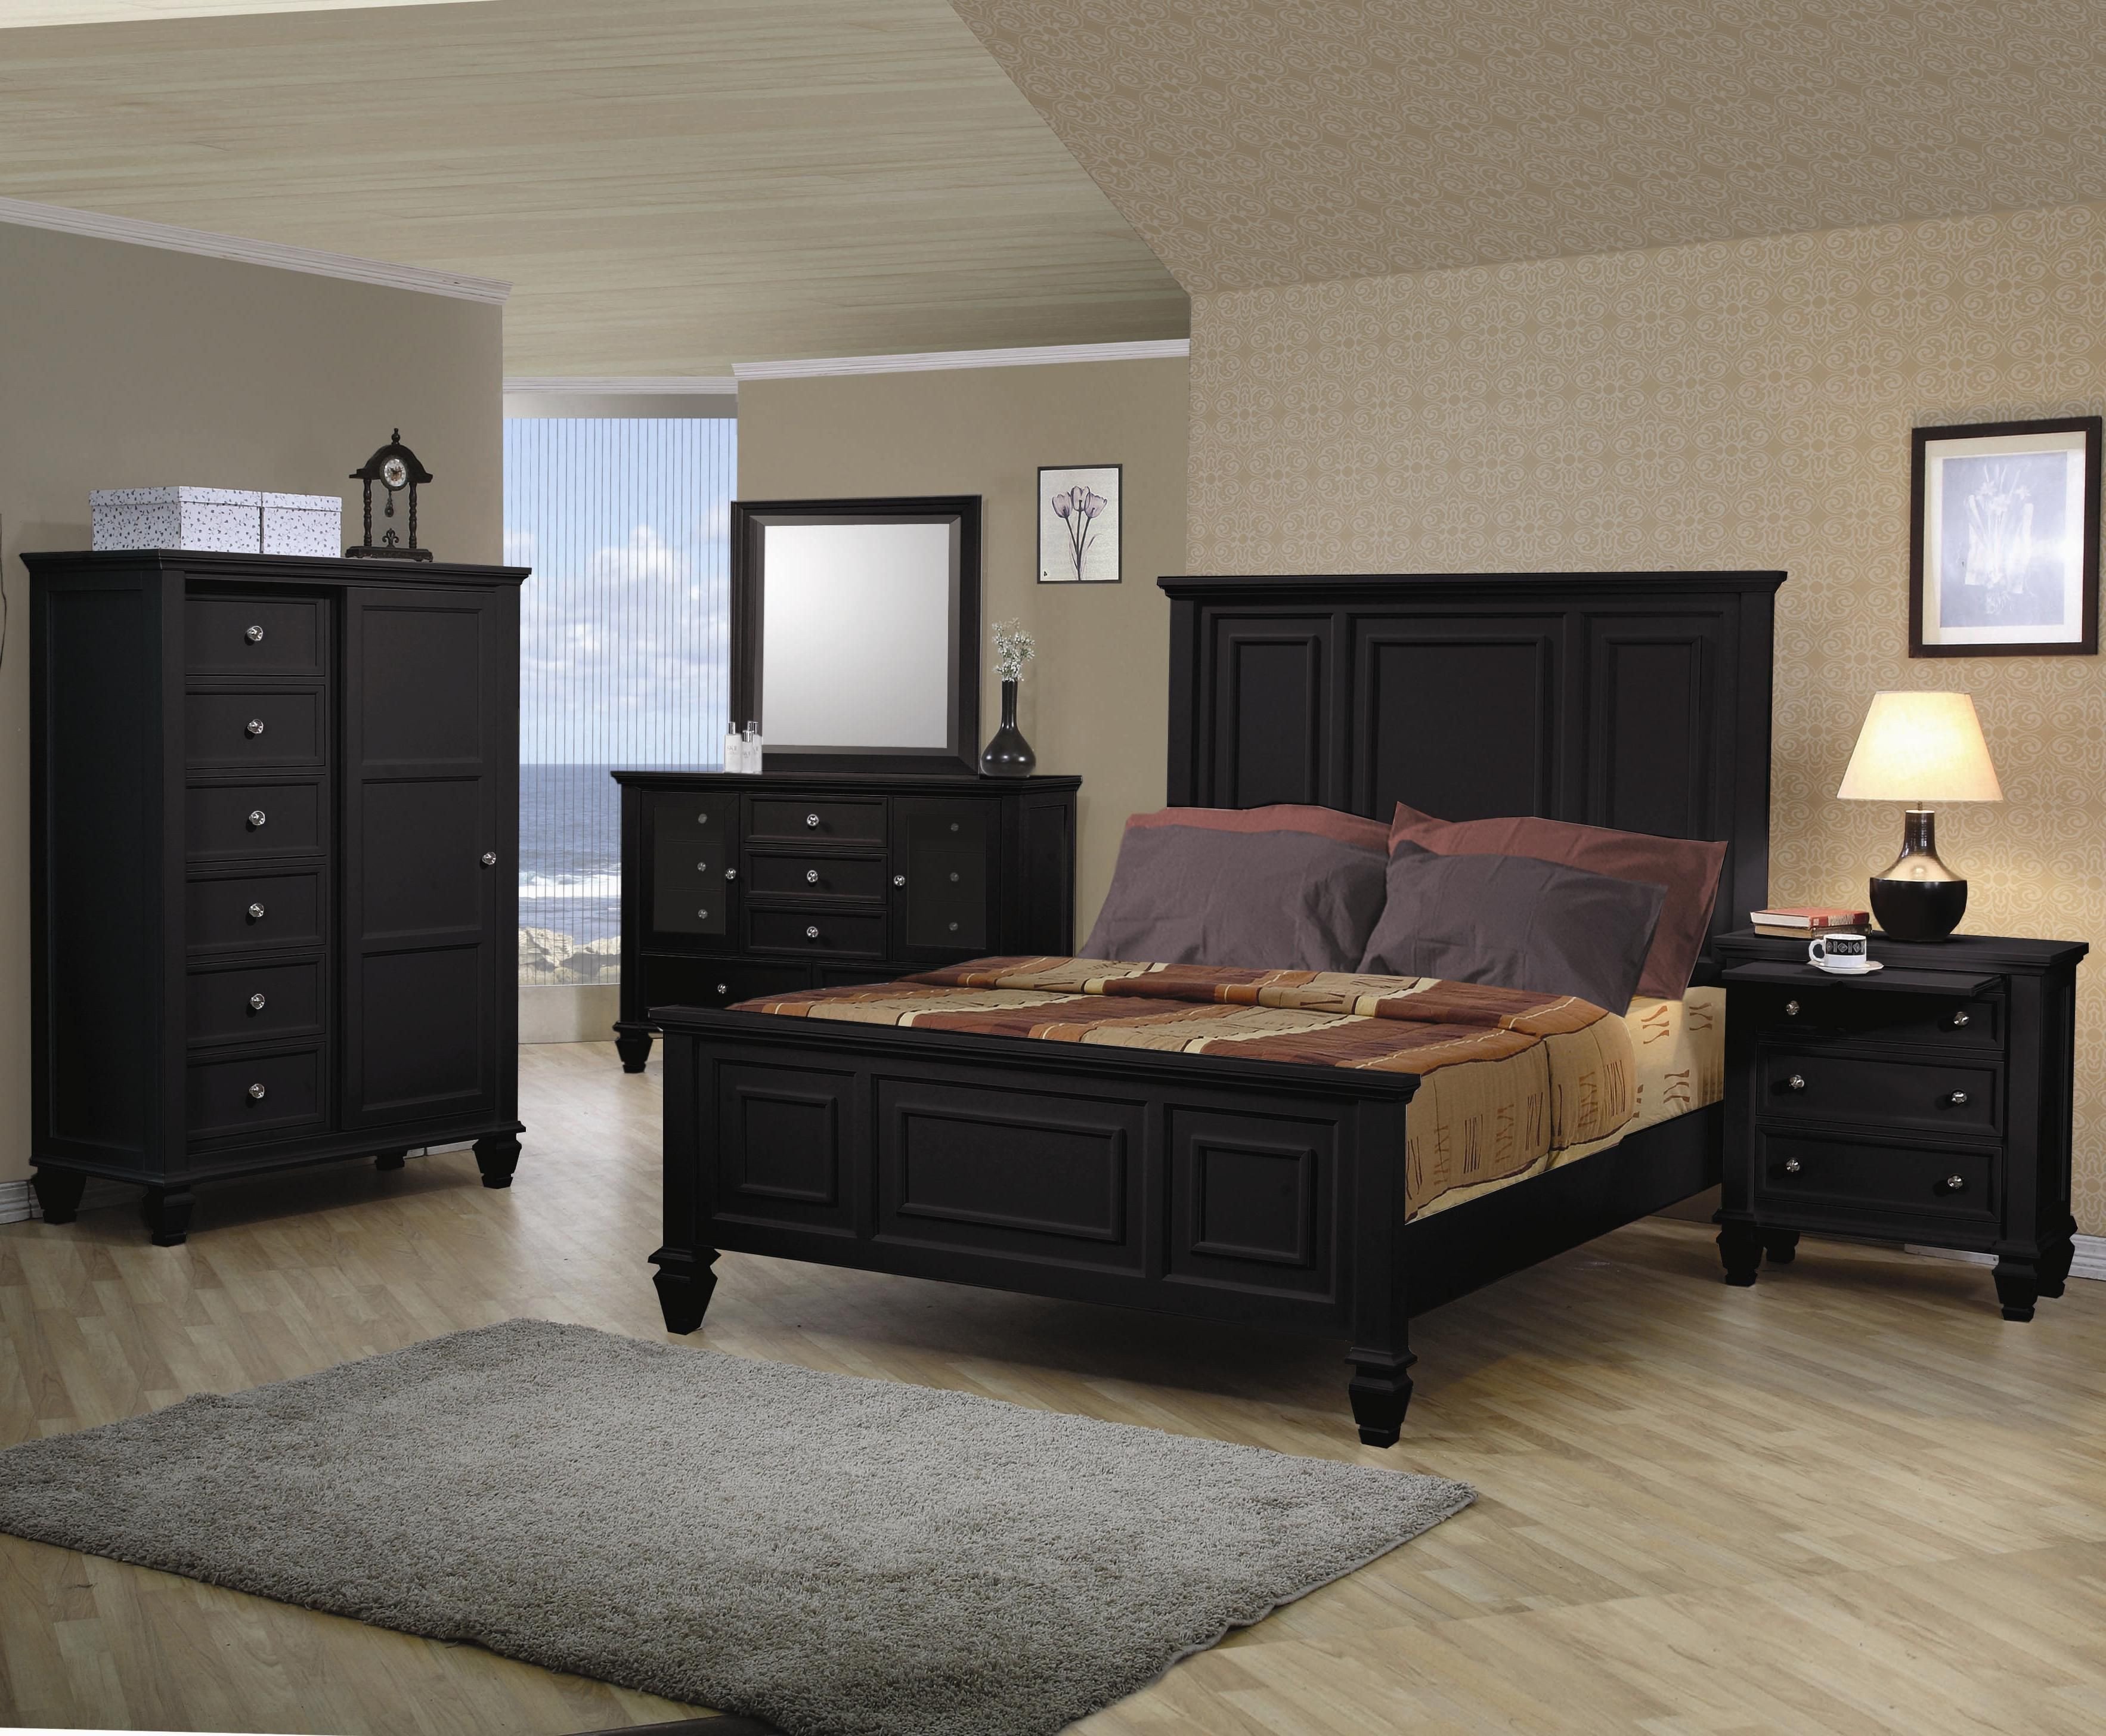 Black King Bedroom Set New Pin On for the Bedroom